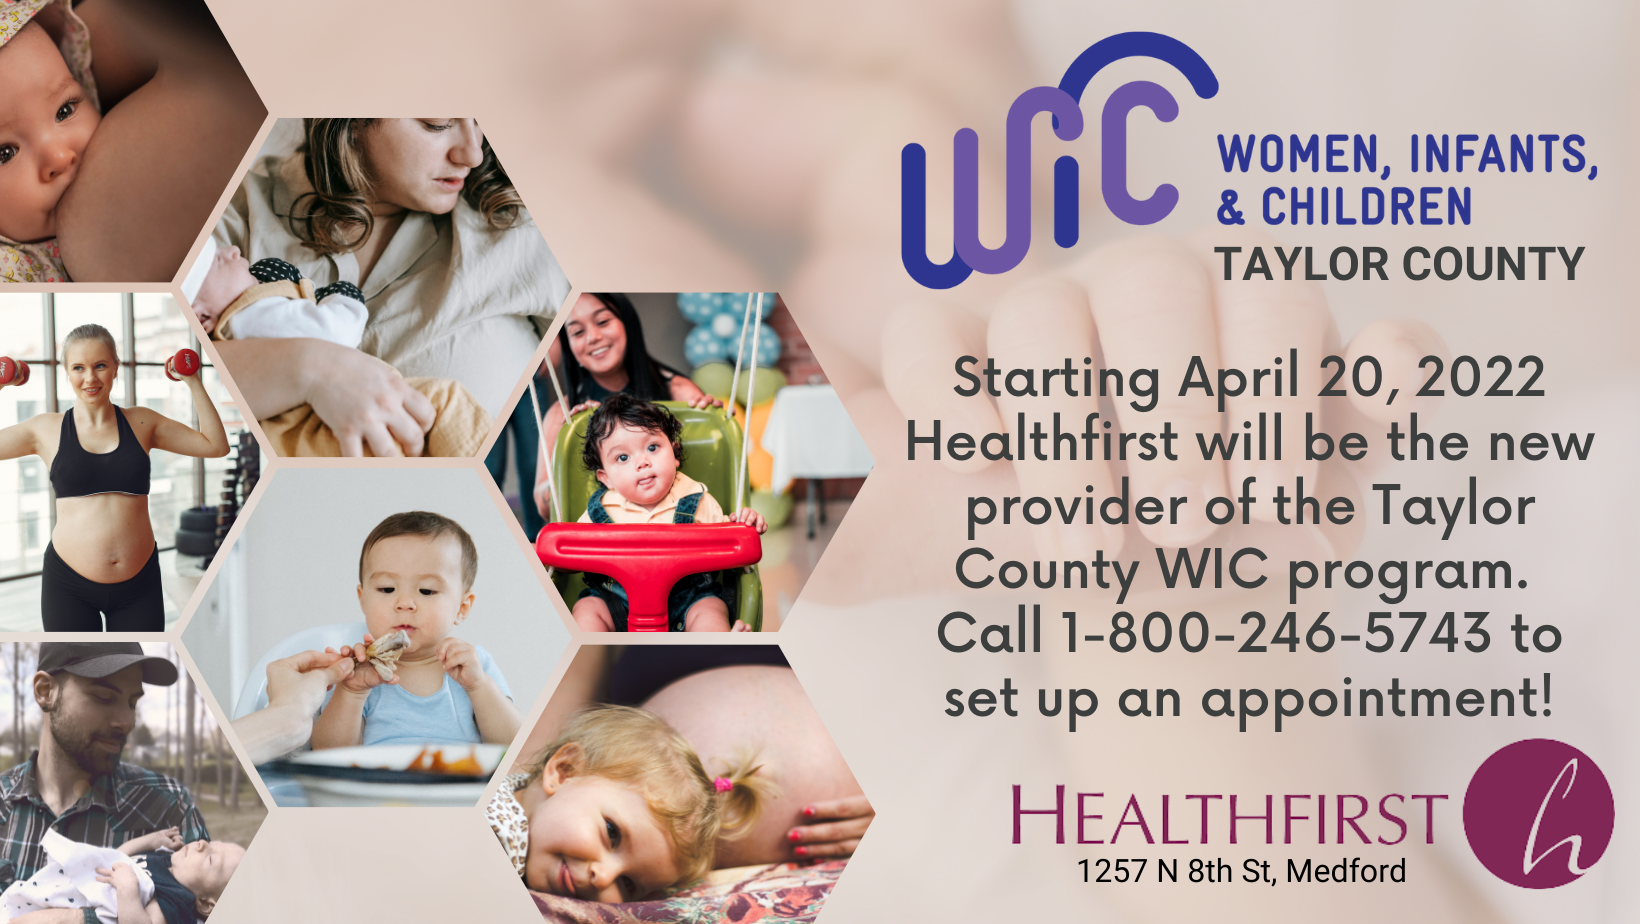 http://healthfirstnetwork.org/sites/healthfirstnetwork.org/assets/images/wic/WIC-FB-Banner-Updated.png